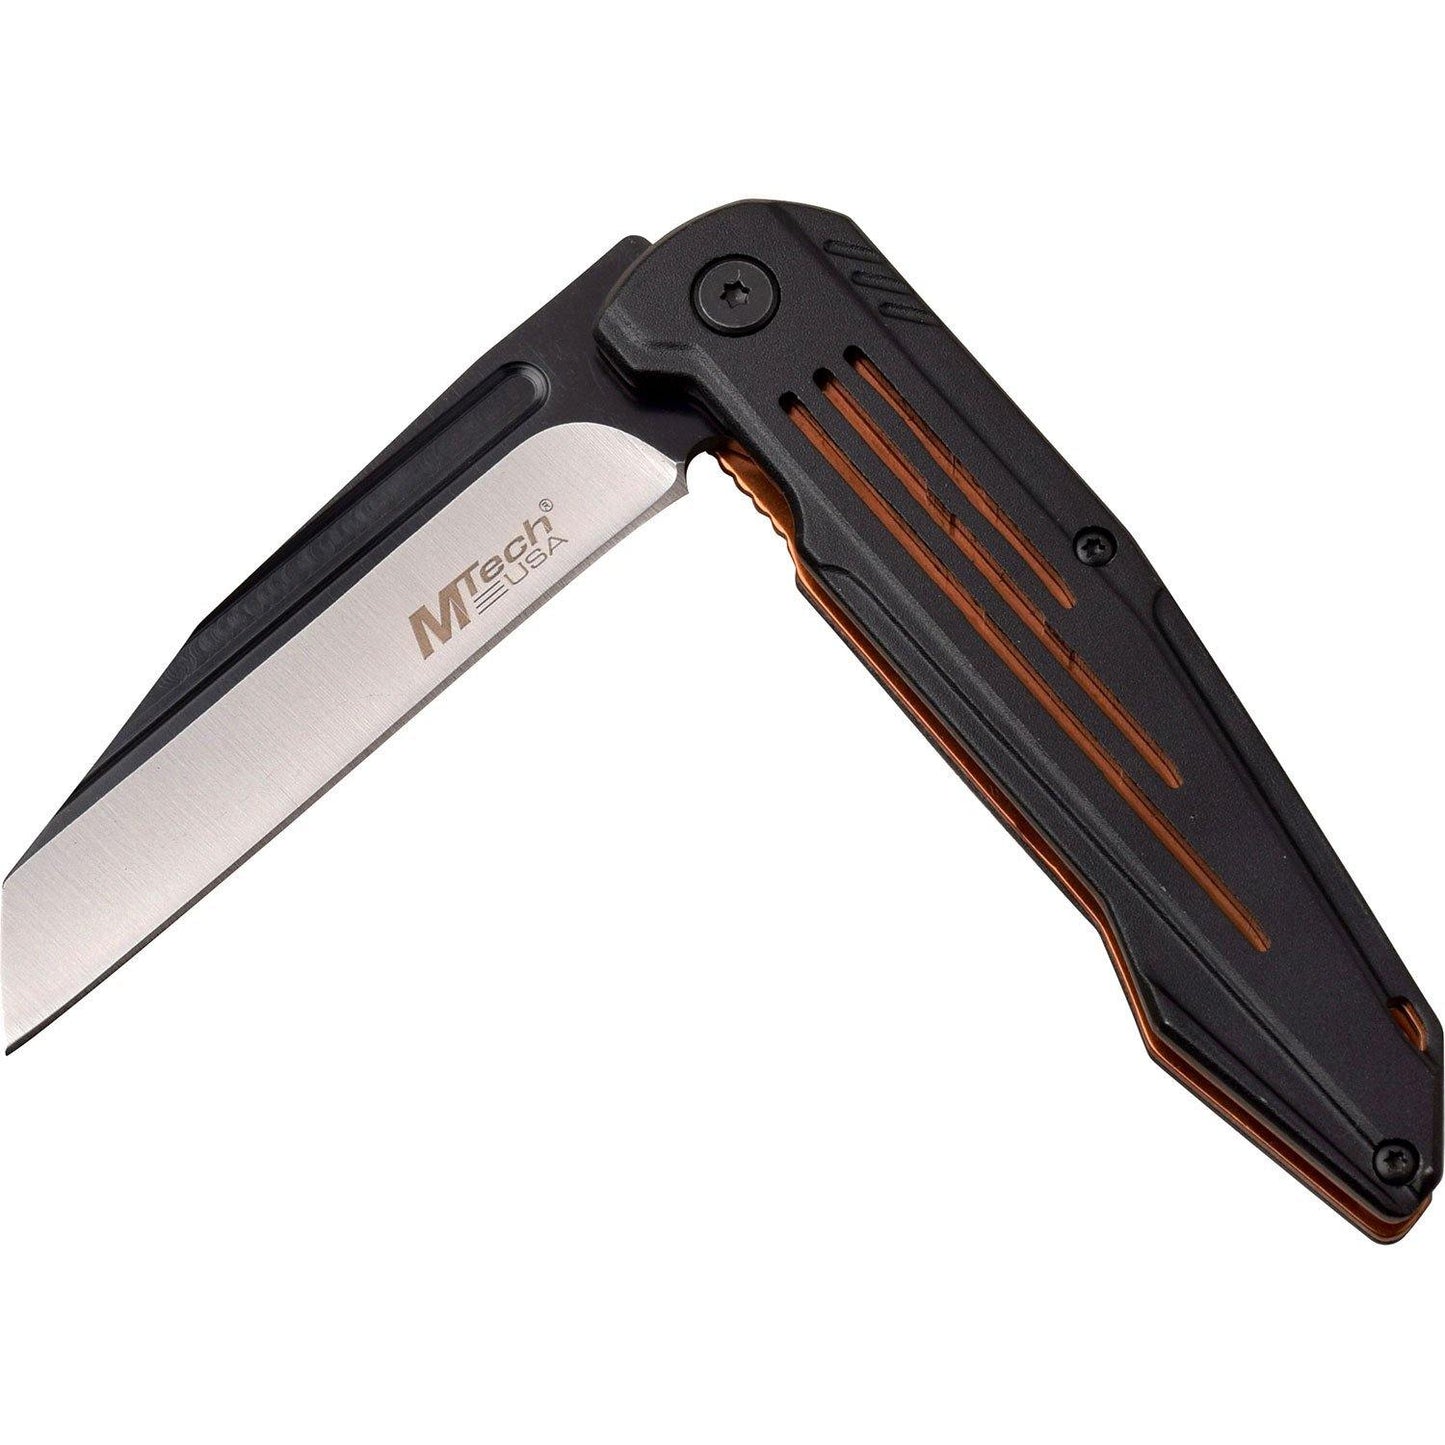 Mtech Fine Edge Blade Manual Folding Knife - 8 Inches Overall #mt-1060Or - Xhunter New Zealand